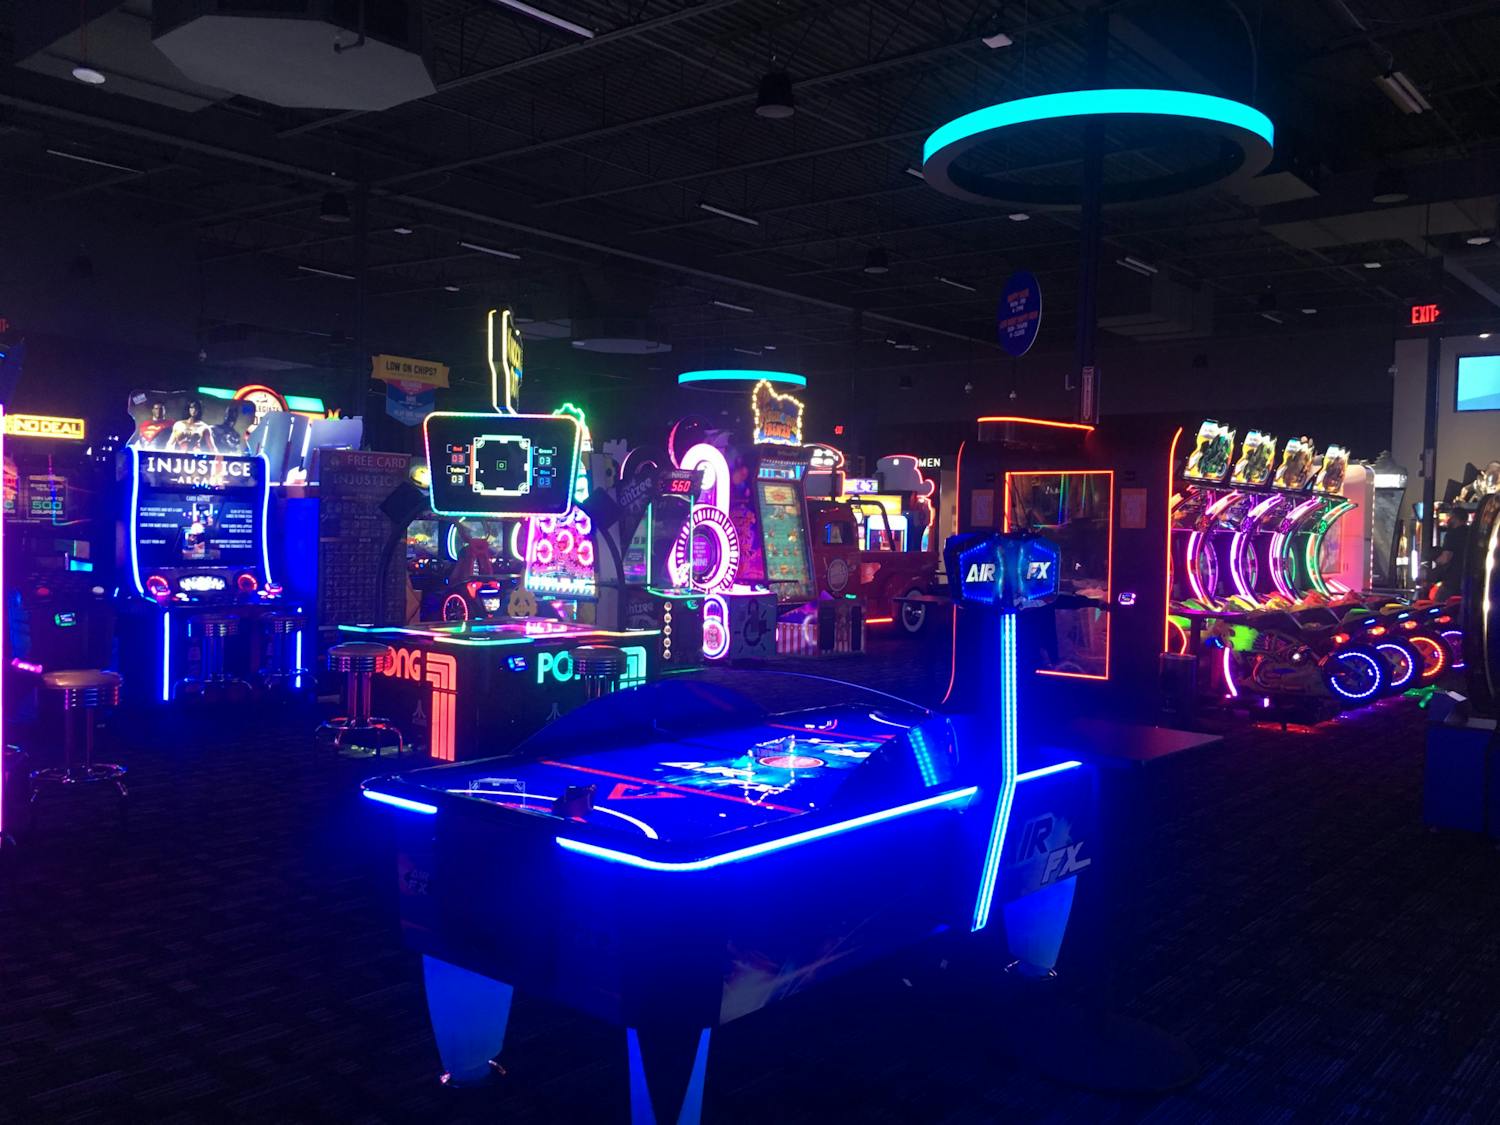 The Dave & Buster’s “Million-Dollar Midway” features a number of classic arcade games.